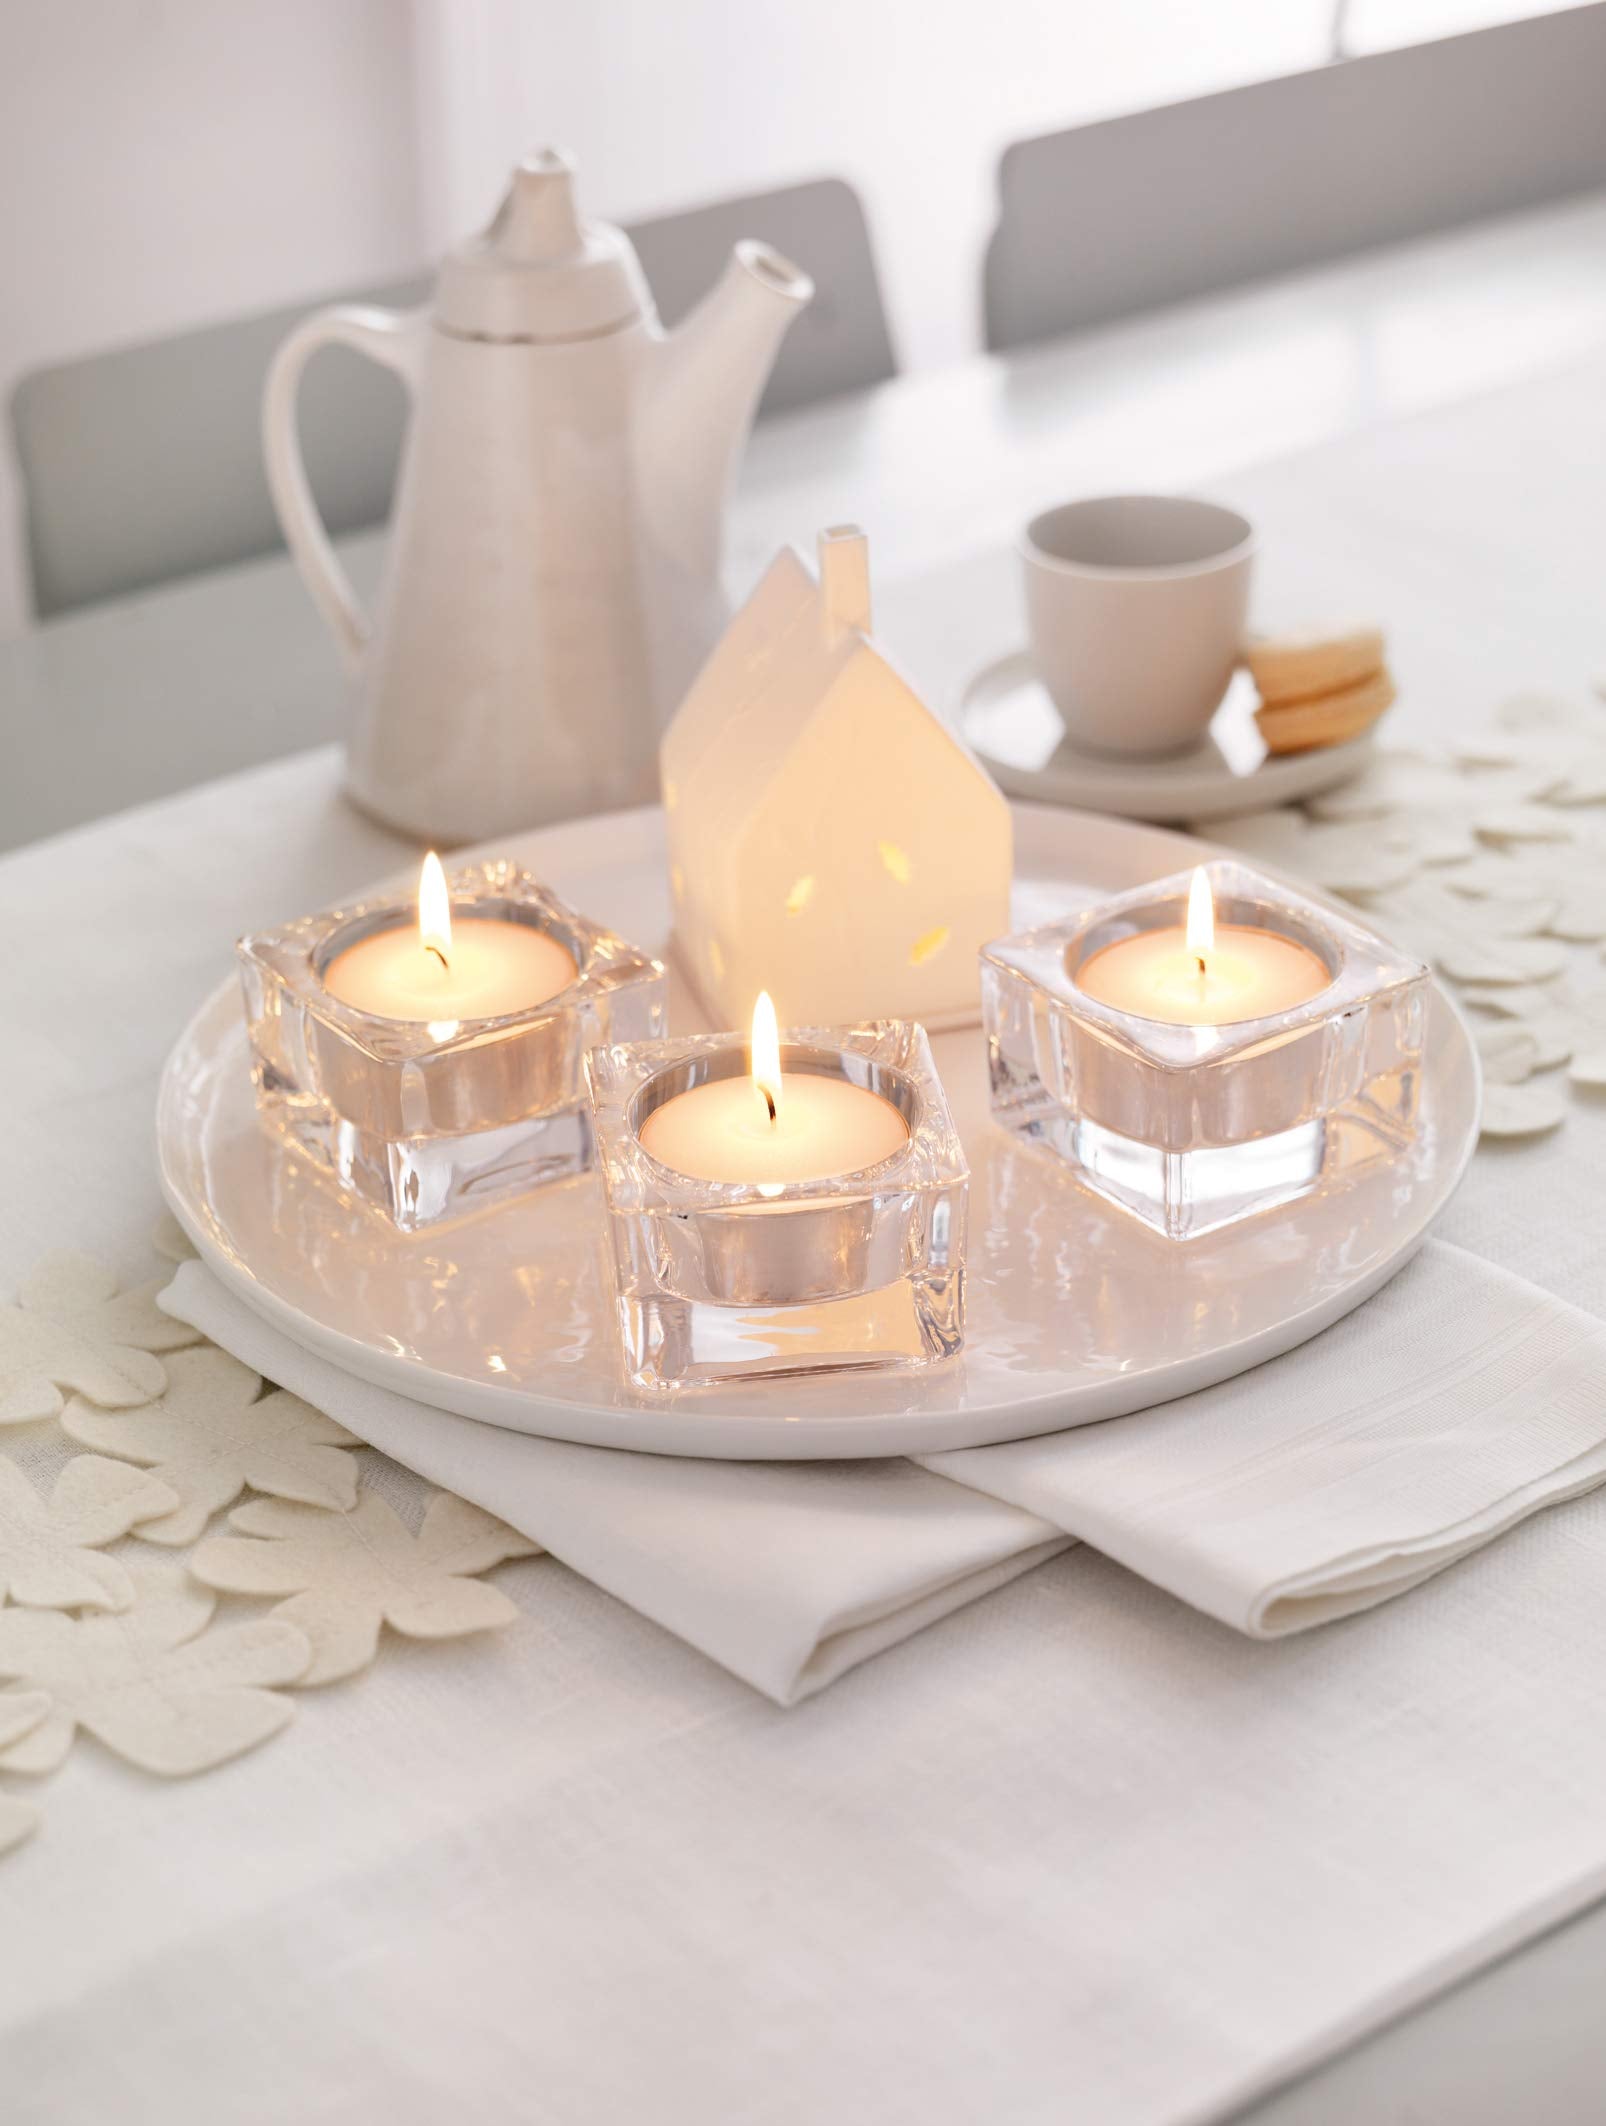 BOLSIUS Tea Light Candles in Clear Cups - Premium European Quality - Consistent Smokeless Flame - Unscented Tealights  - Like New